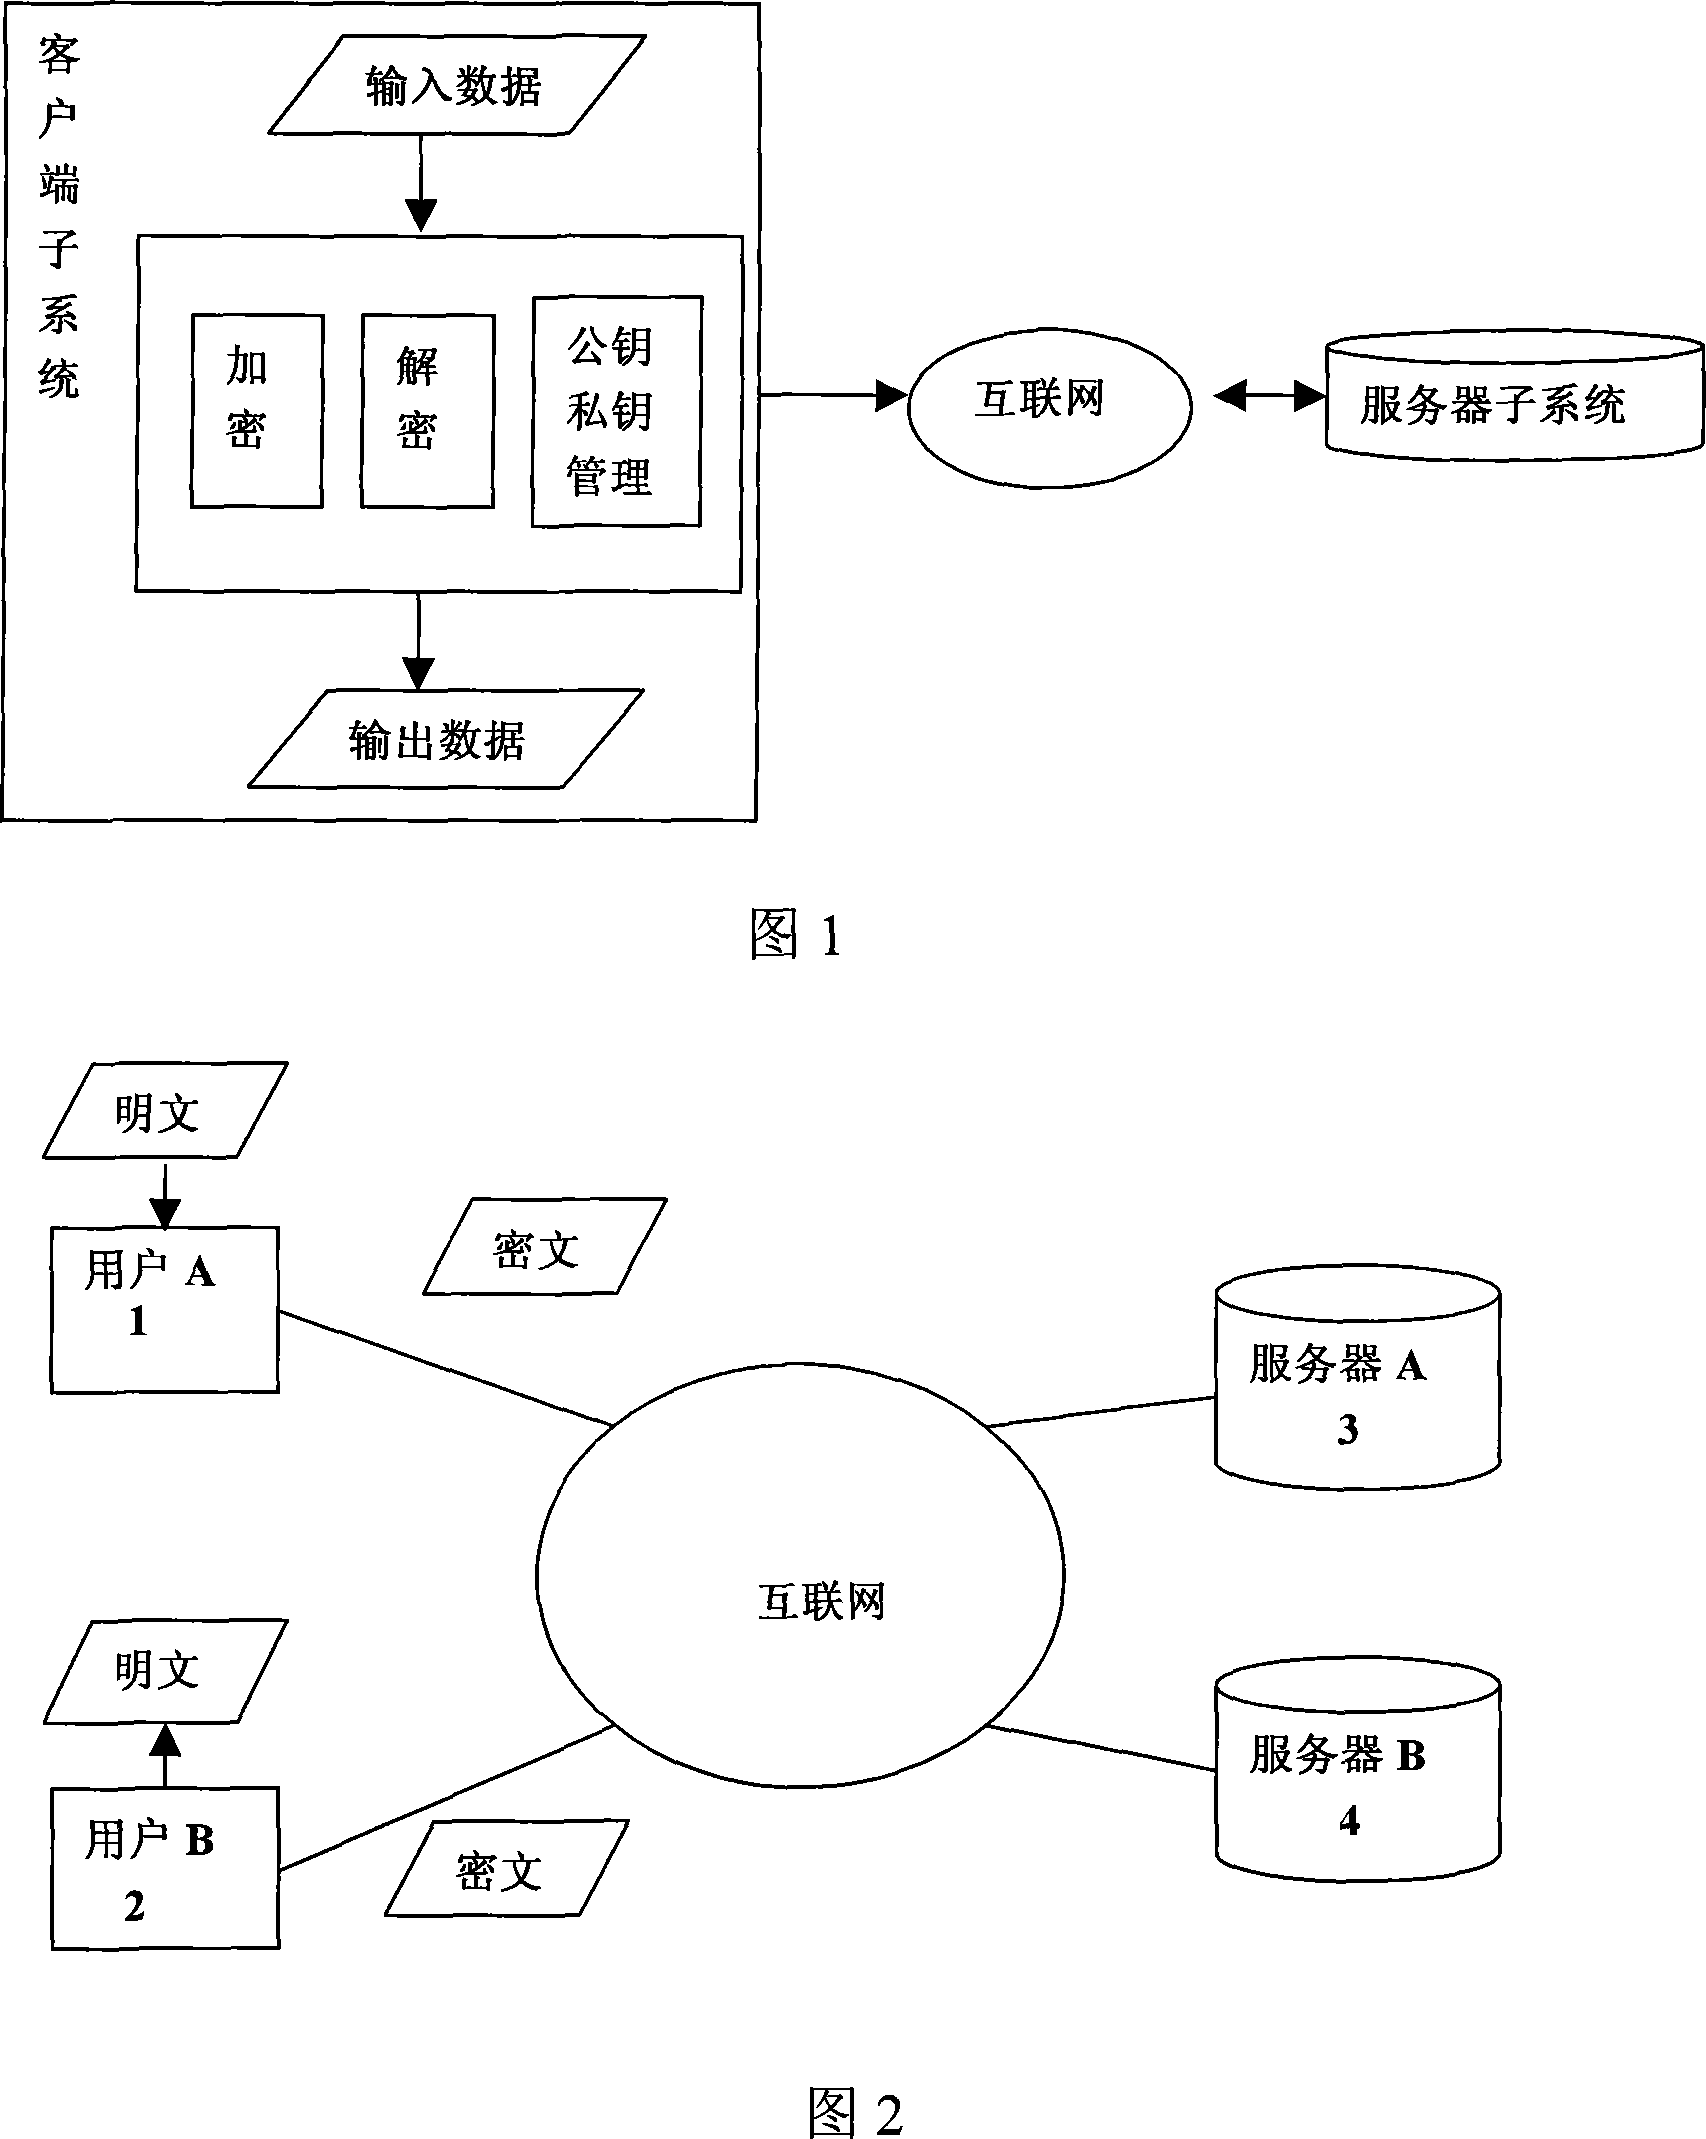 A data encryption, decryption system and method